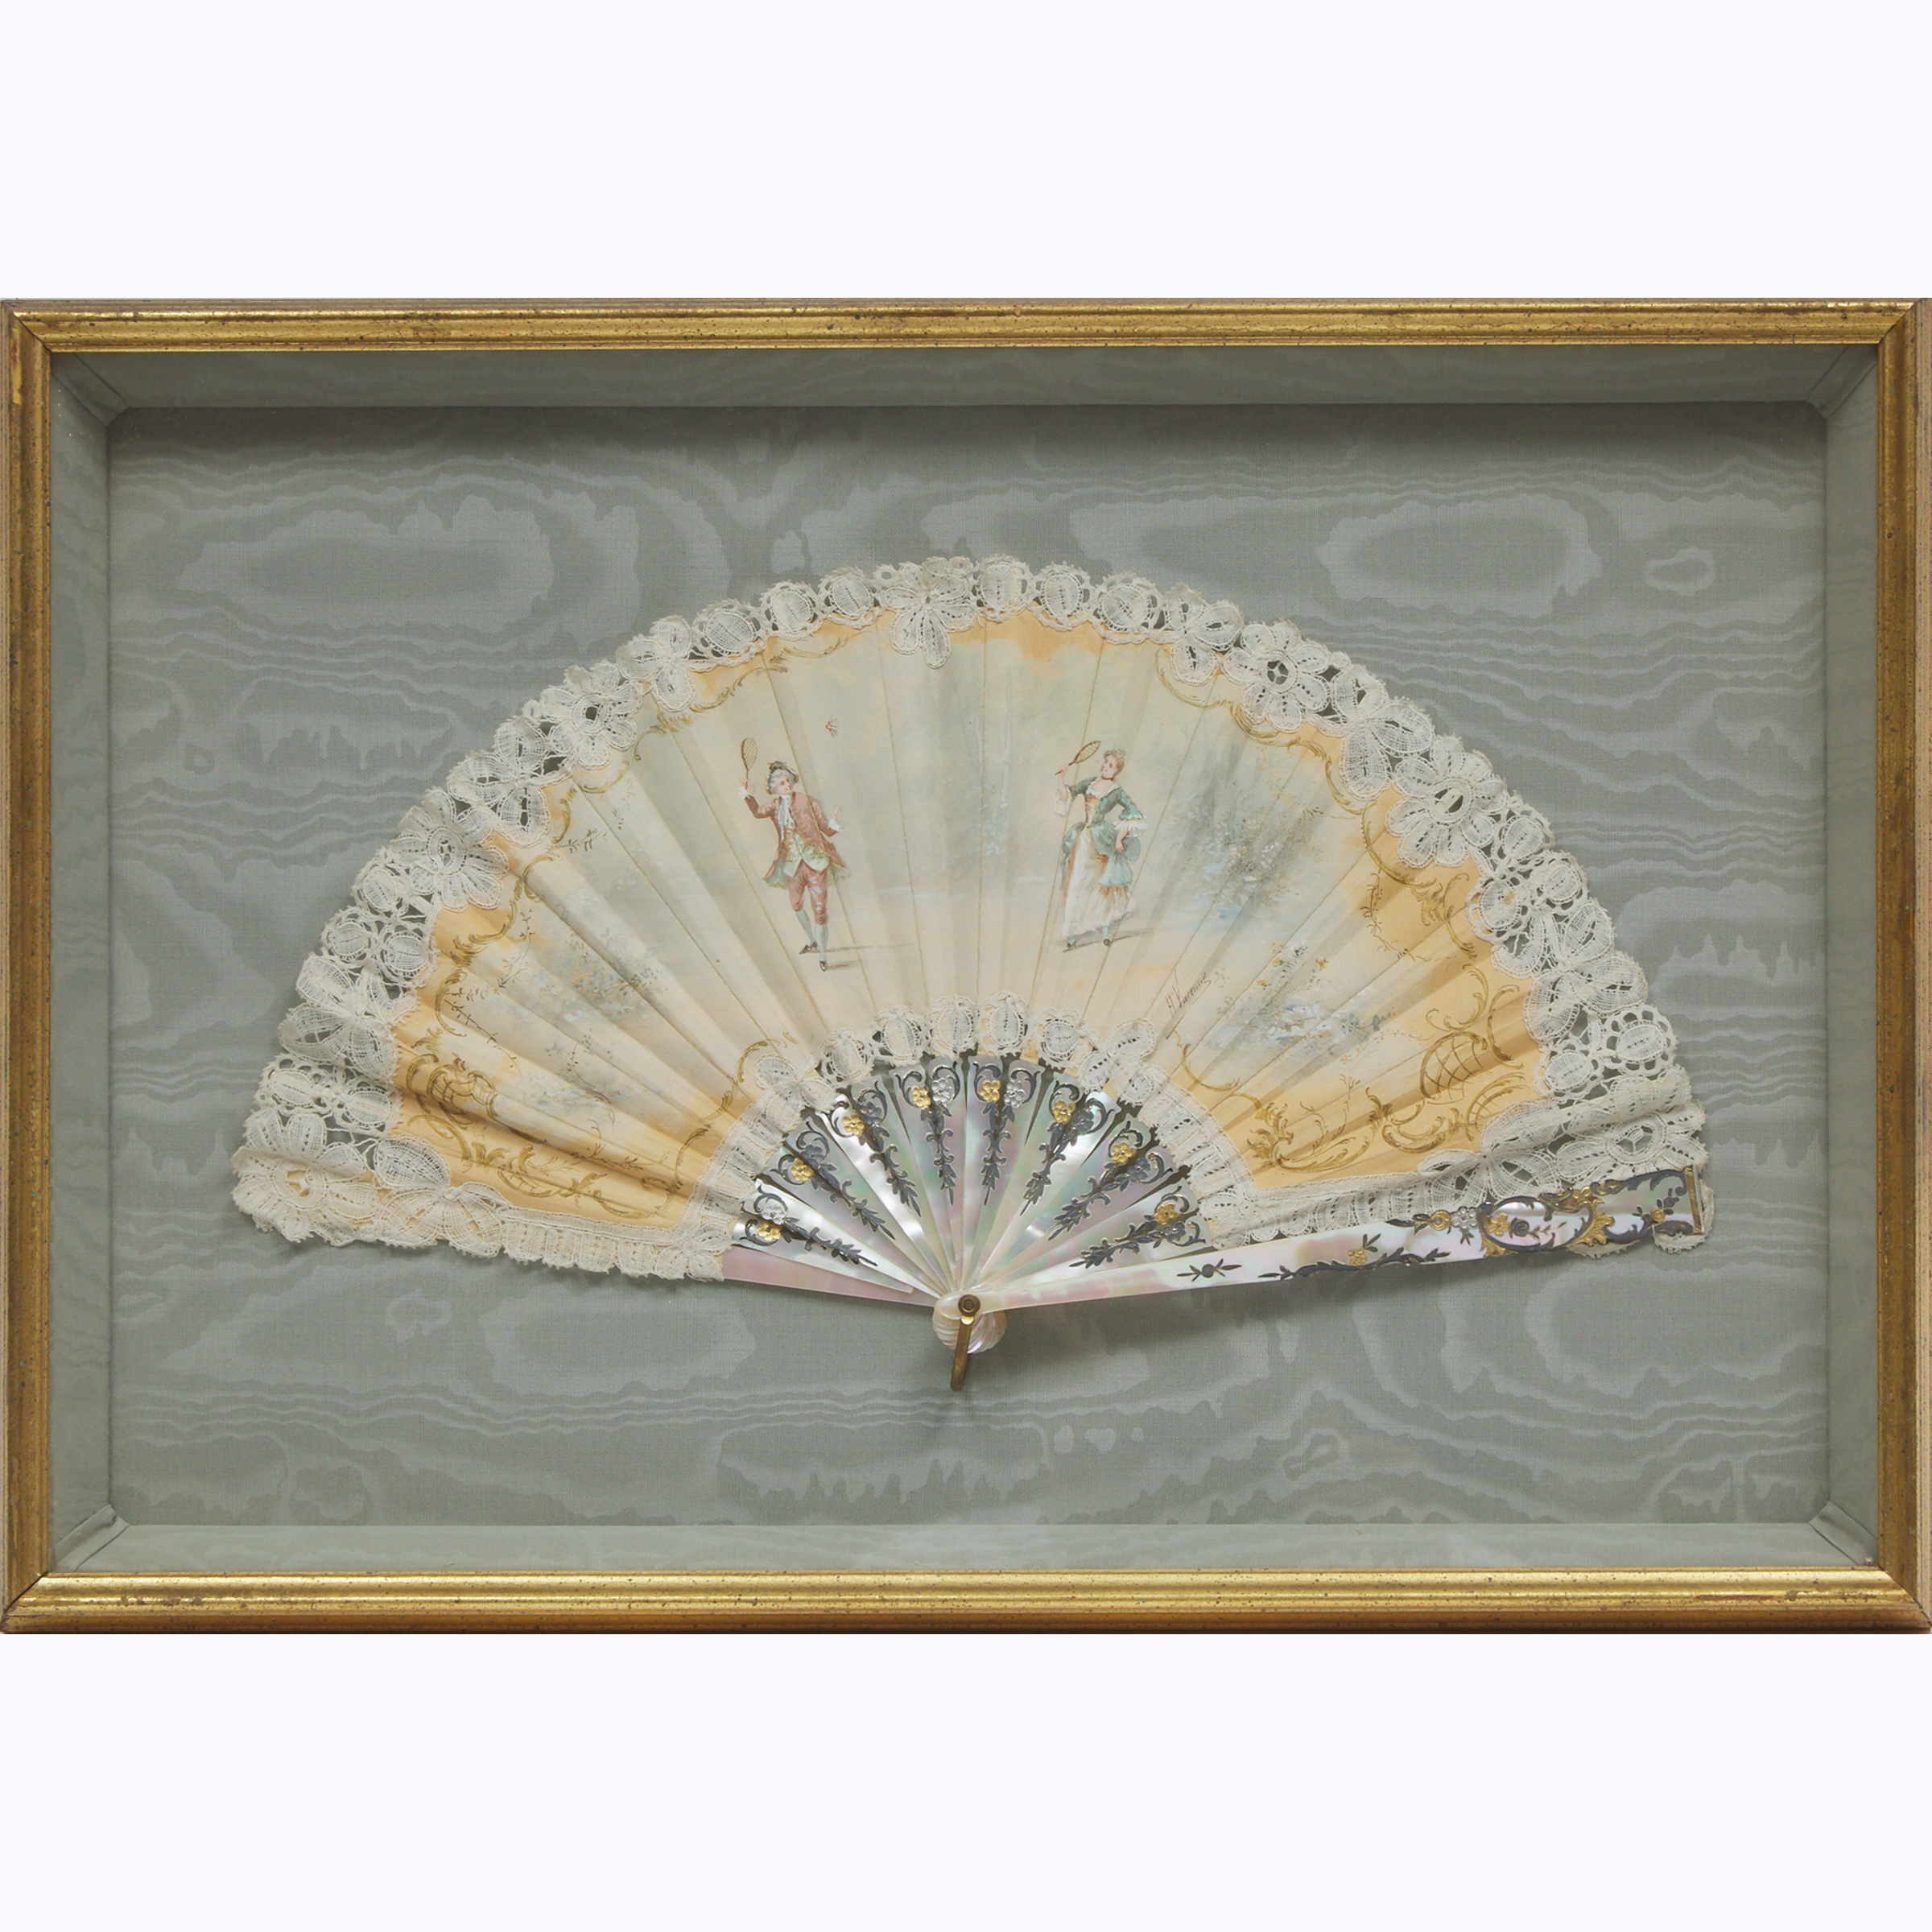 Frame Cased French Lace and Painted Silk Fan, 19th century